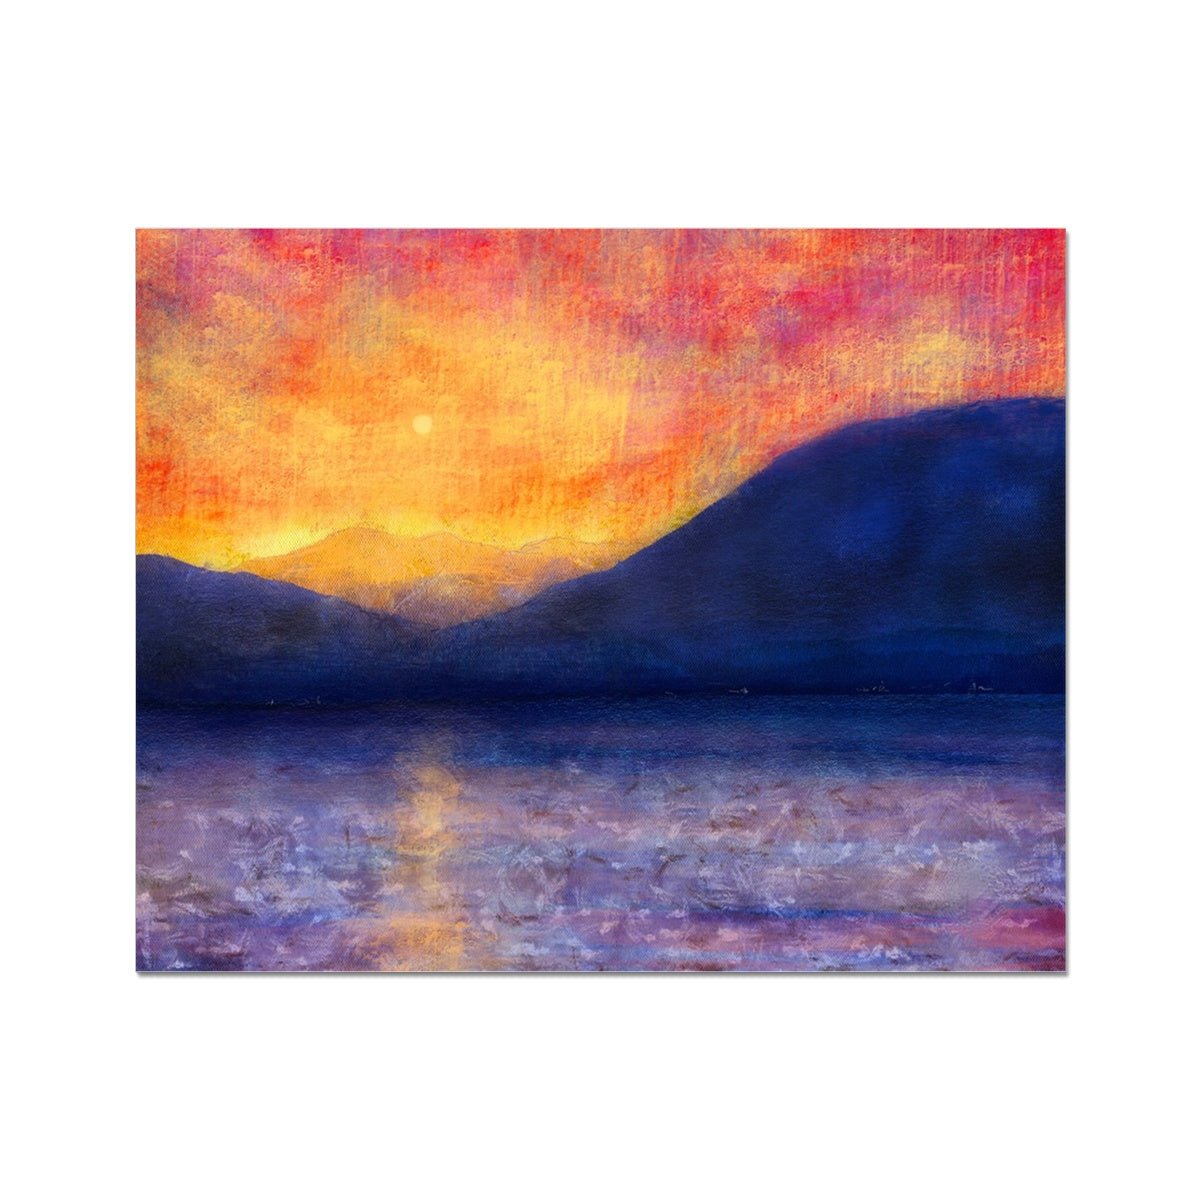 Sunset Approaching Mull Painting | Artist Proof Collector Prints From Scotland-Artist Proof Collector Prints-Hebridean Islands Art Gallery-20"x16"-Paintings, Prints, Homeware, Art Gifts From Scotland By Scottish Artist Kevin Hunter